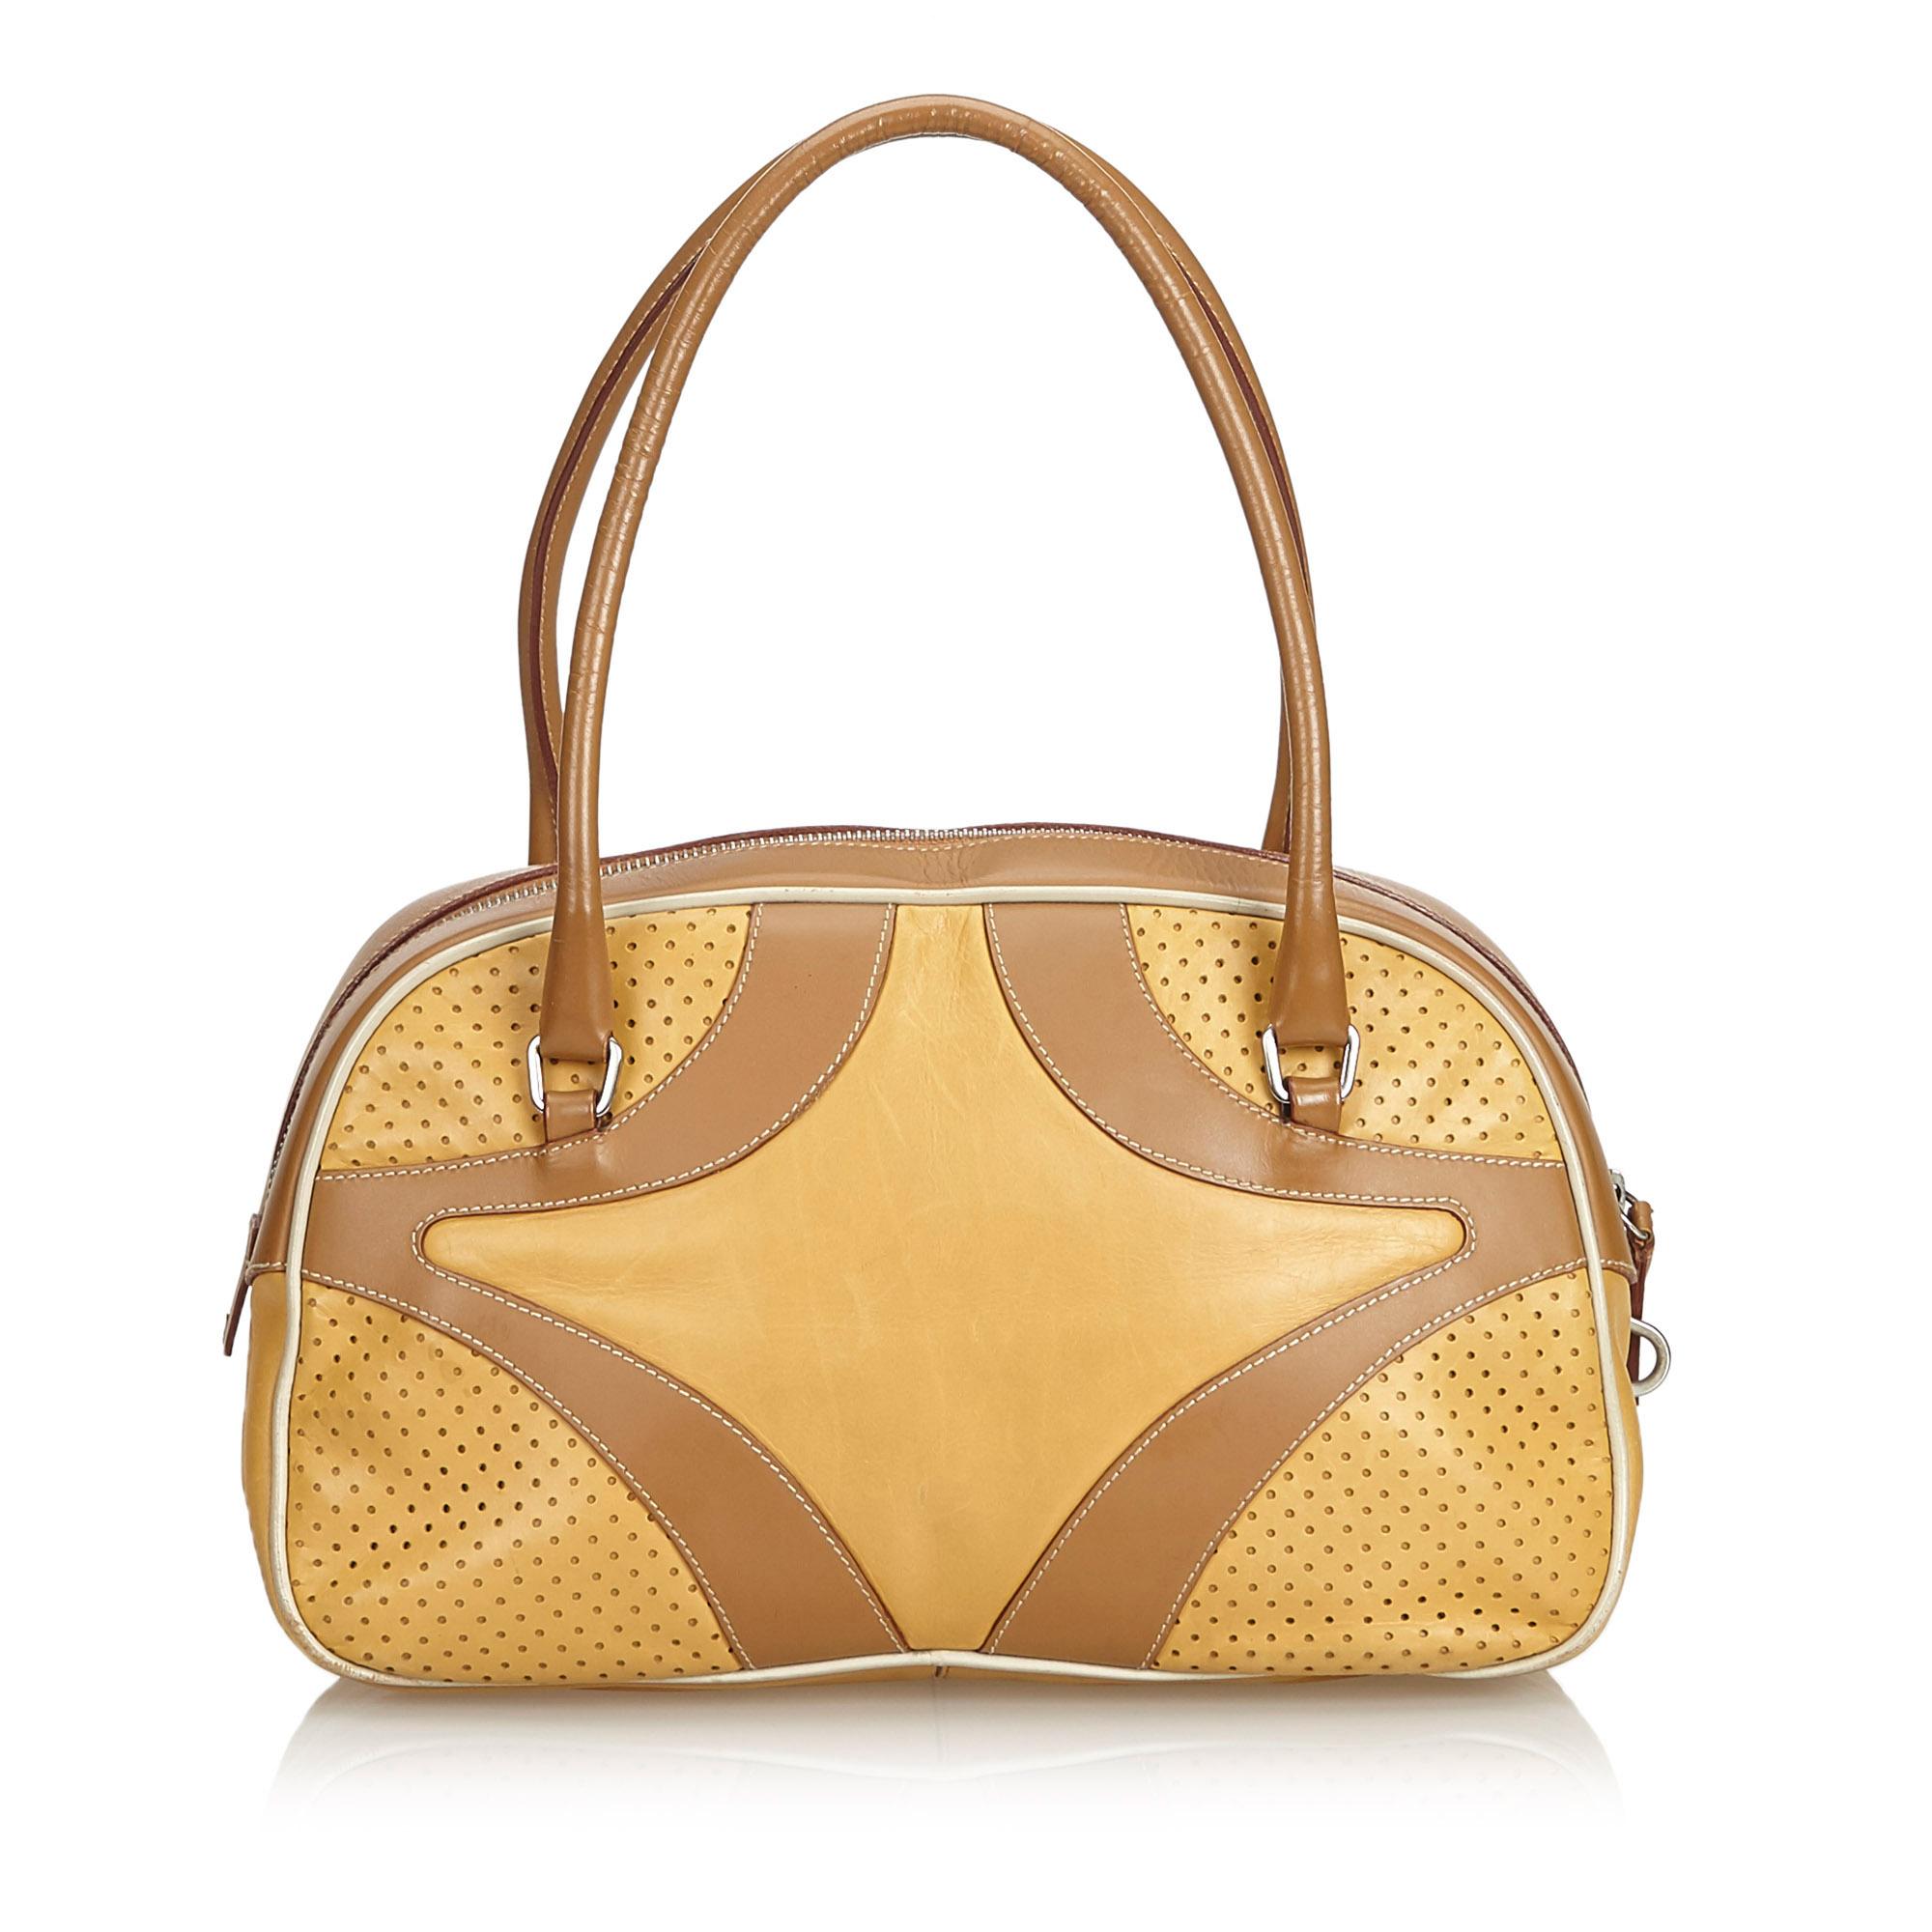 Prada Brown Light Brown Leather Perforated Handbag Italy w/ Dust Bag In Good Condition For Sale In Orlando, FL